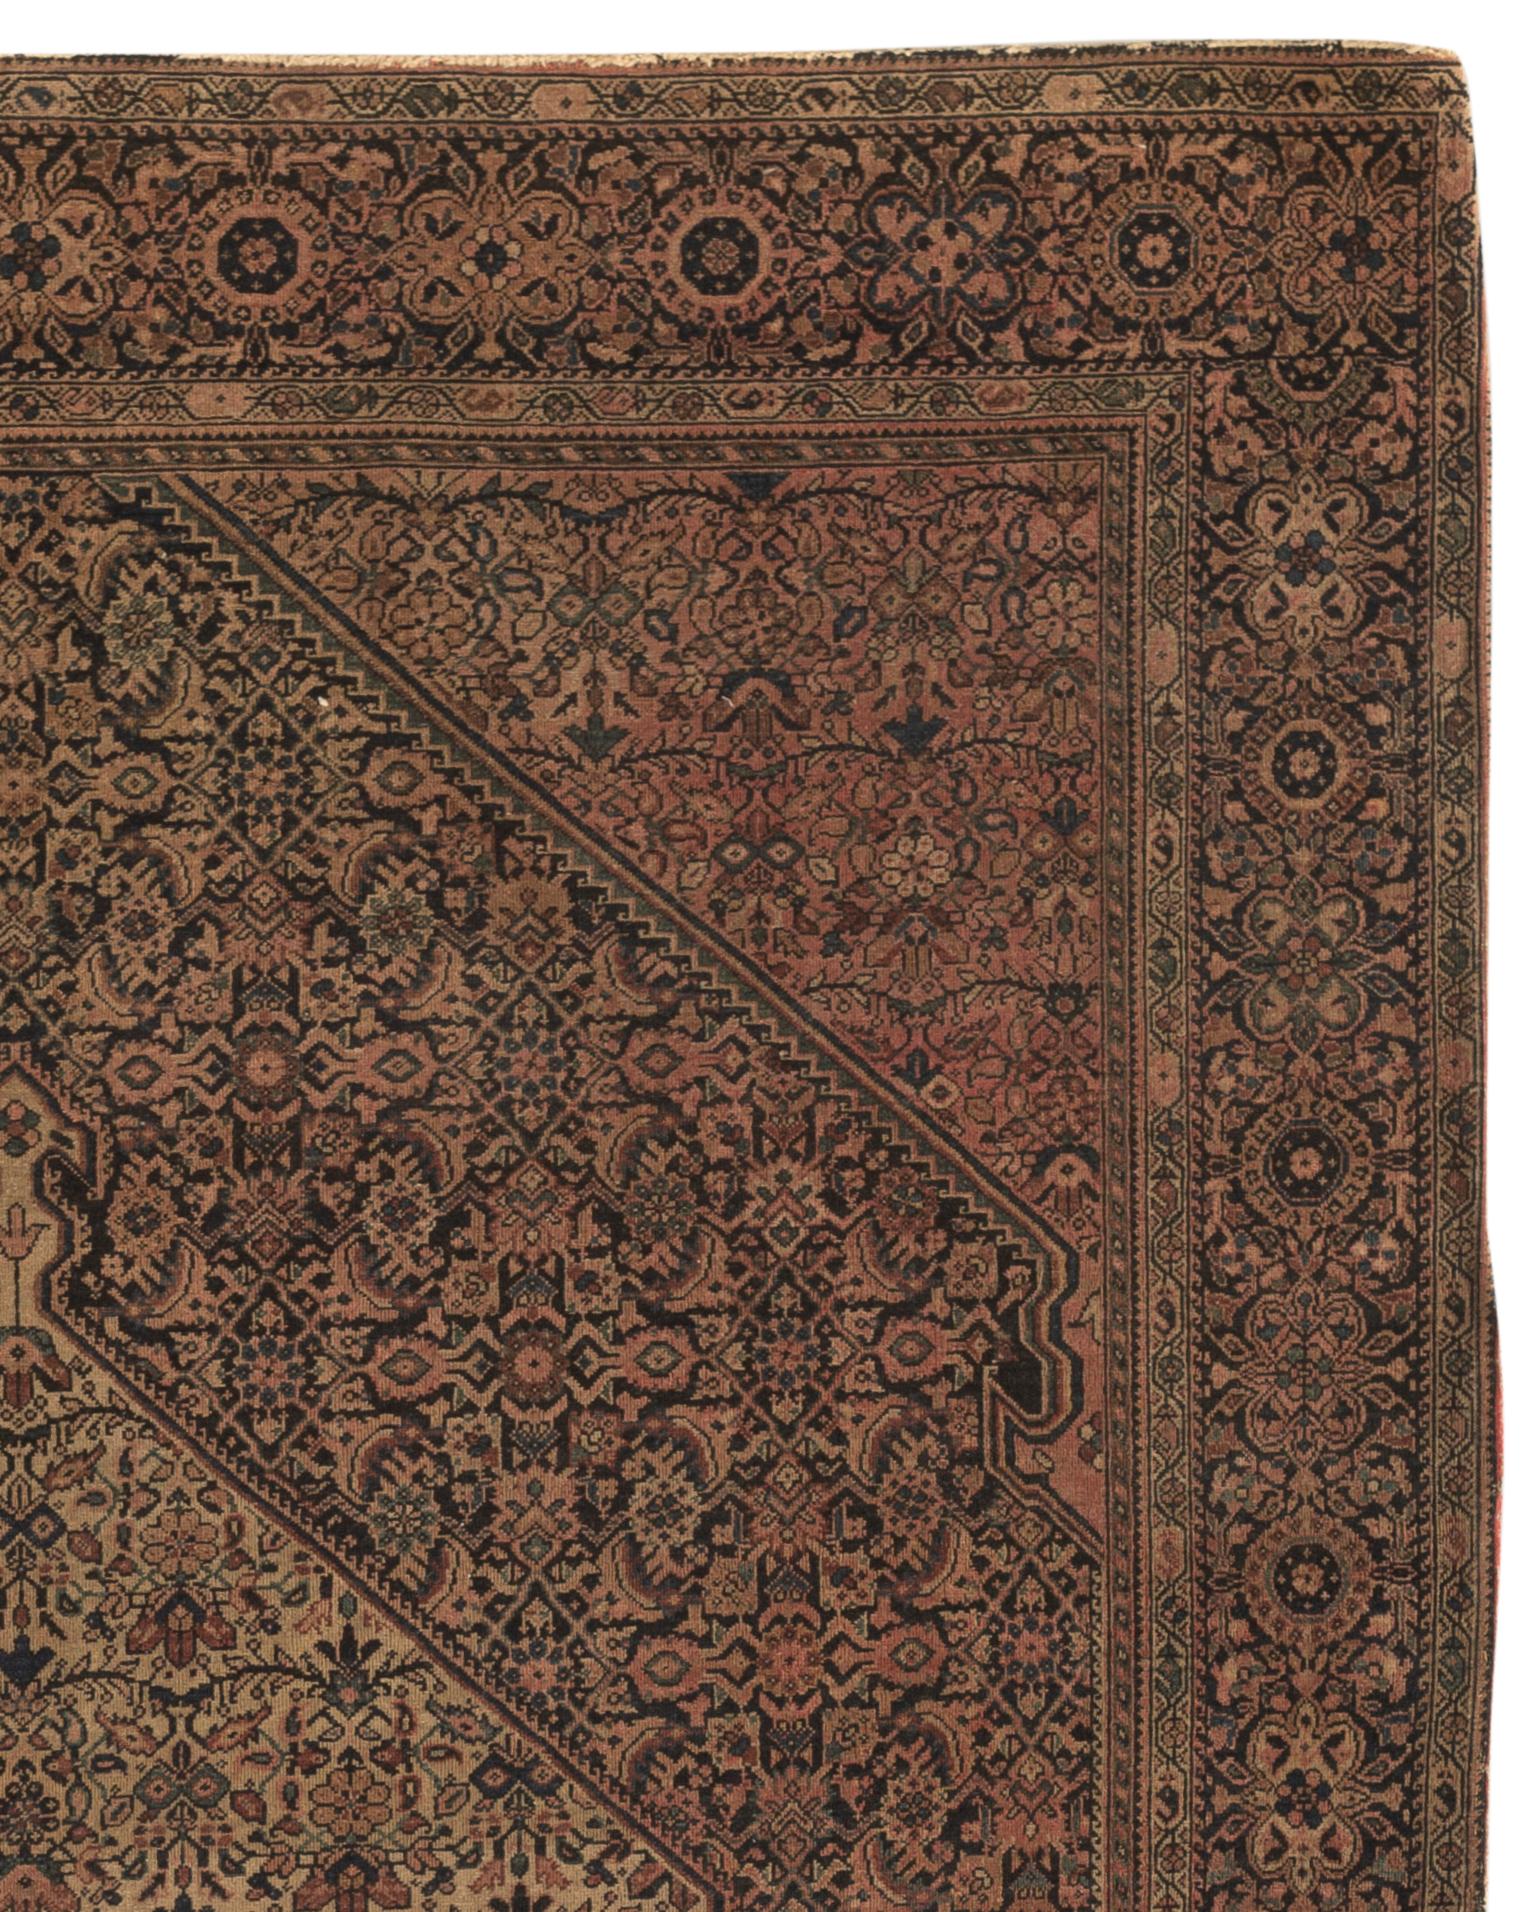 Antique Persian Farahan Sarouk rug, circa 1880. Sarouk rugs come from west central Persia. A small rug but with a lot of detail woven into the rug by truly skilled weavers to create a true work of art. Size: 4'2 x 6'6.